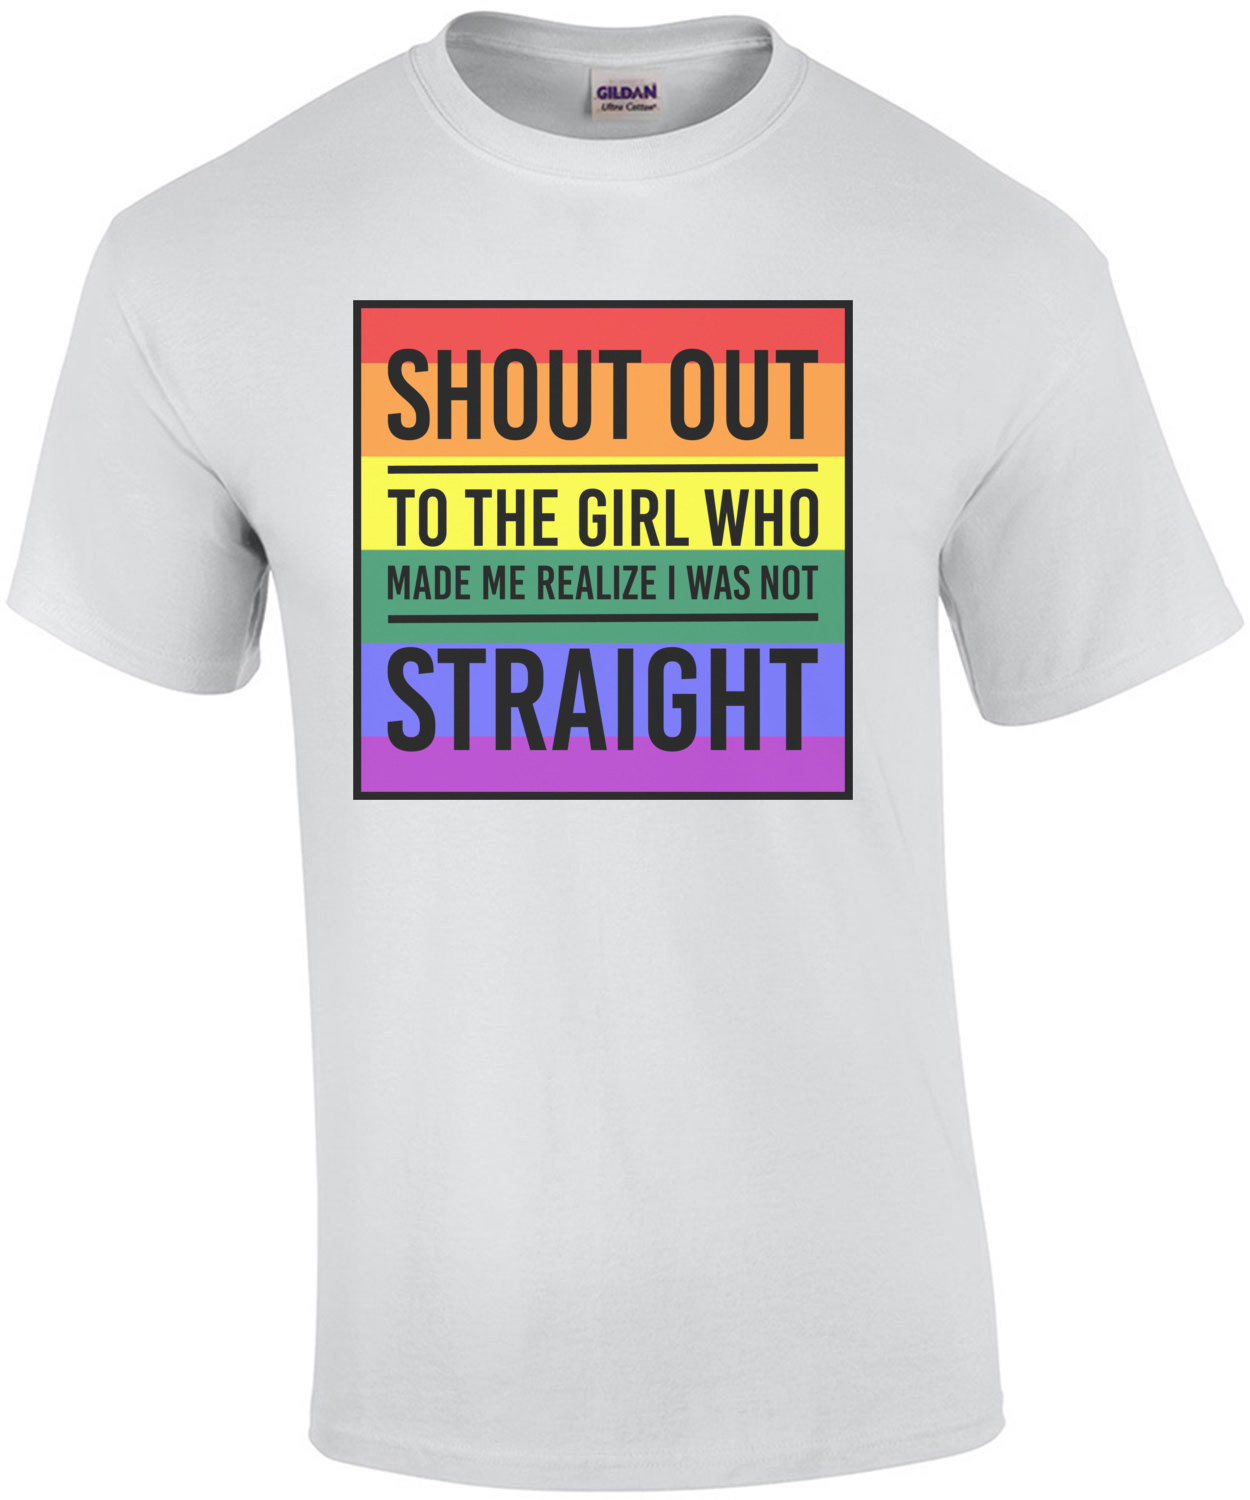 Shout out to the girl who made me realize I was not straight - gay t-shirt